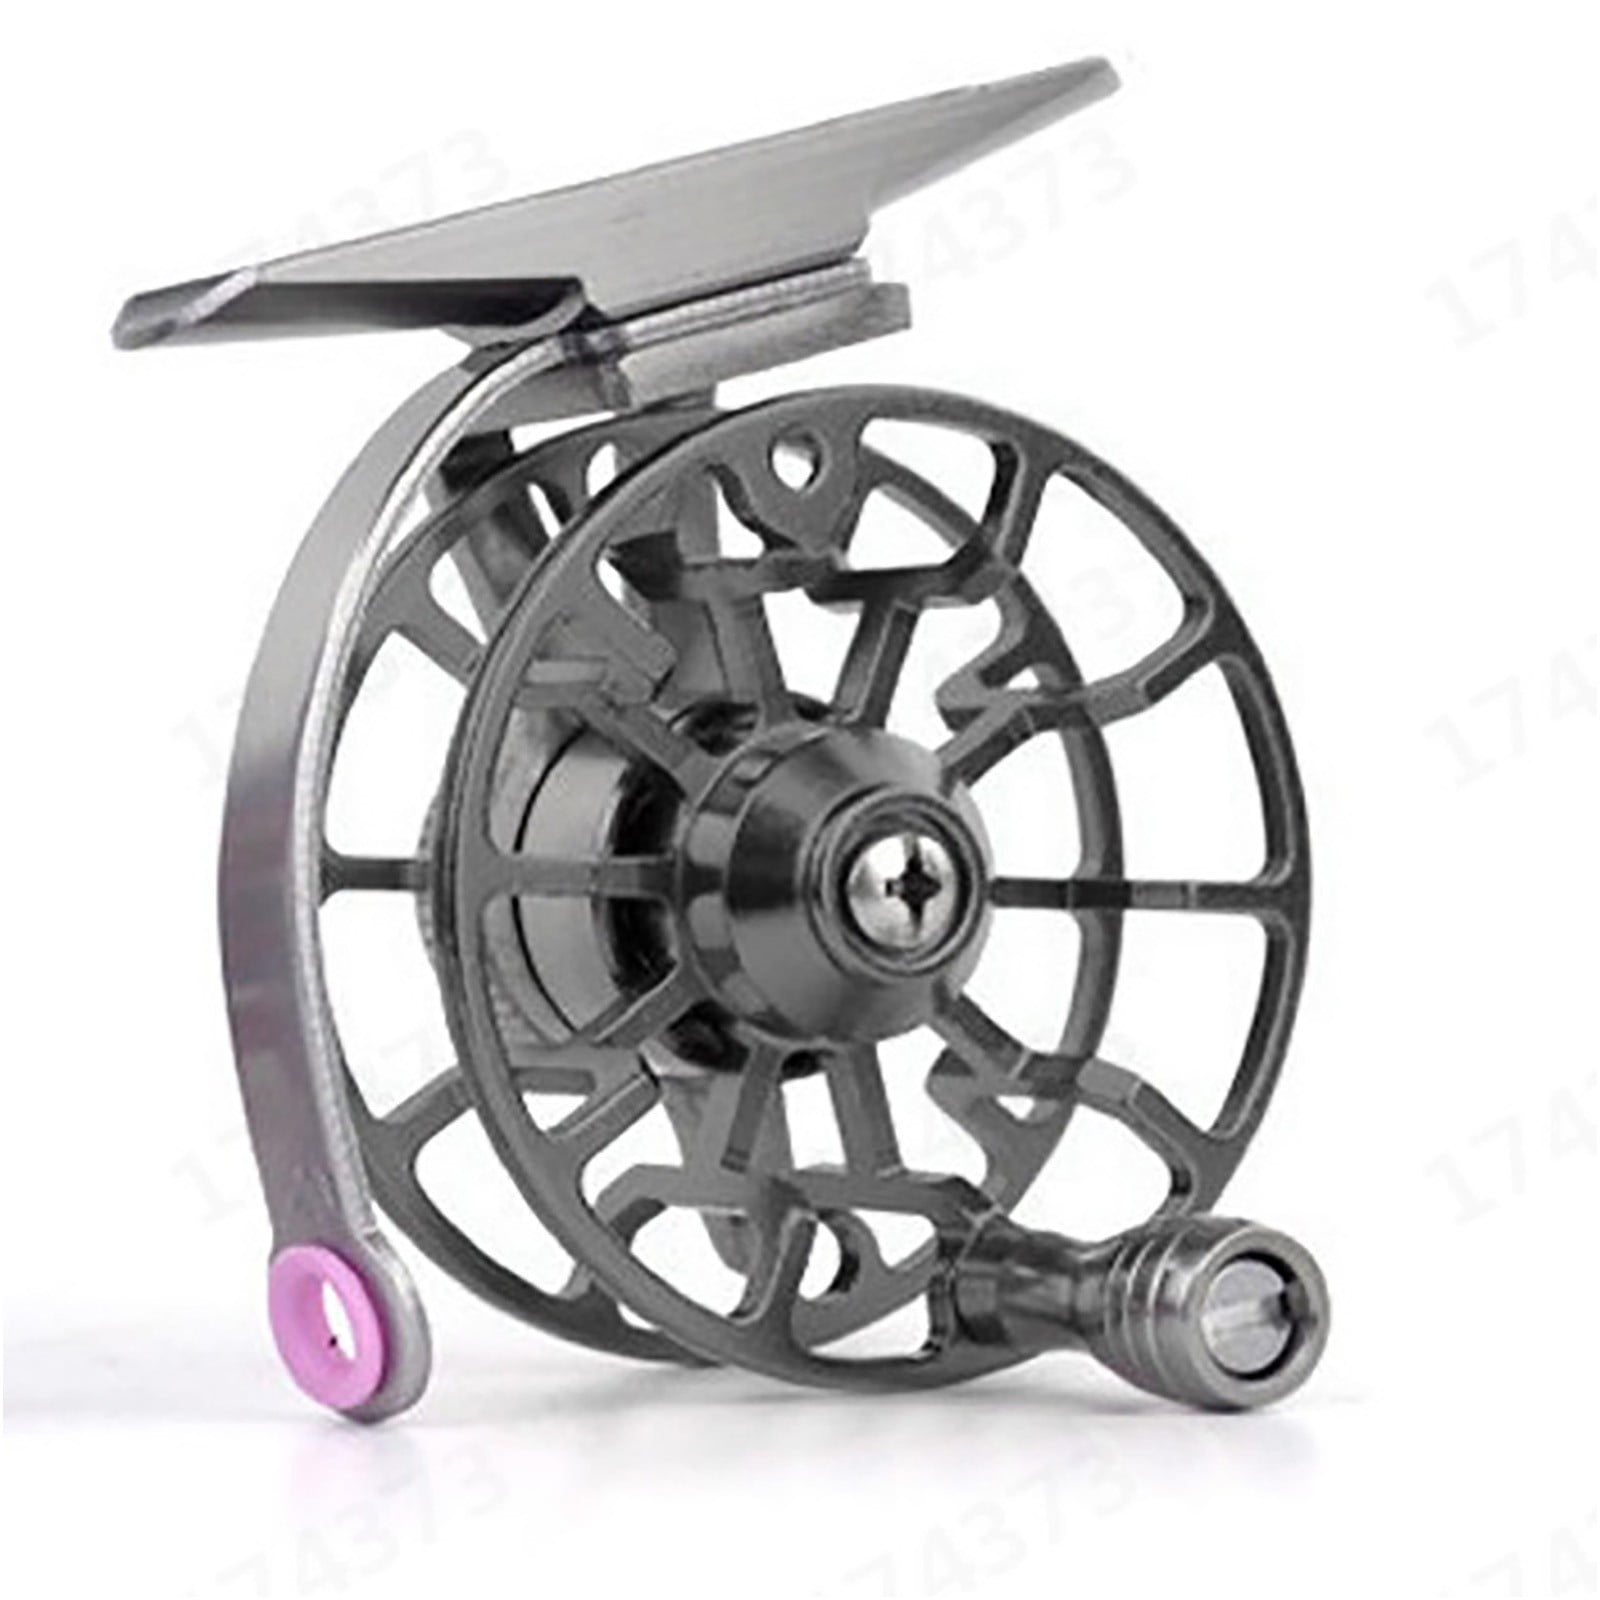 Kayannuo Christmas Clearance Items All-metal Spinning Wheel Fishing Reel  Long-throwing Fishing Gear